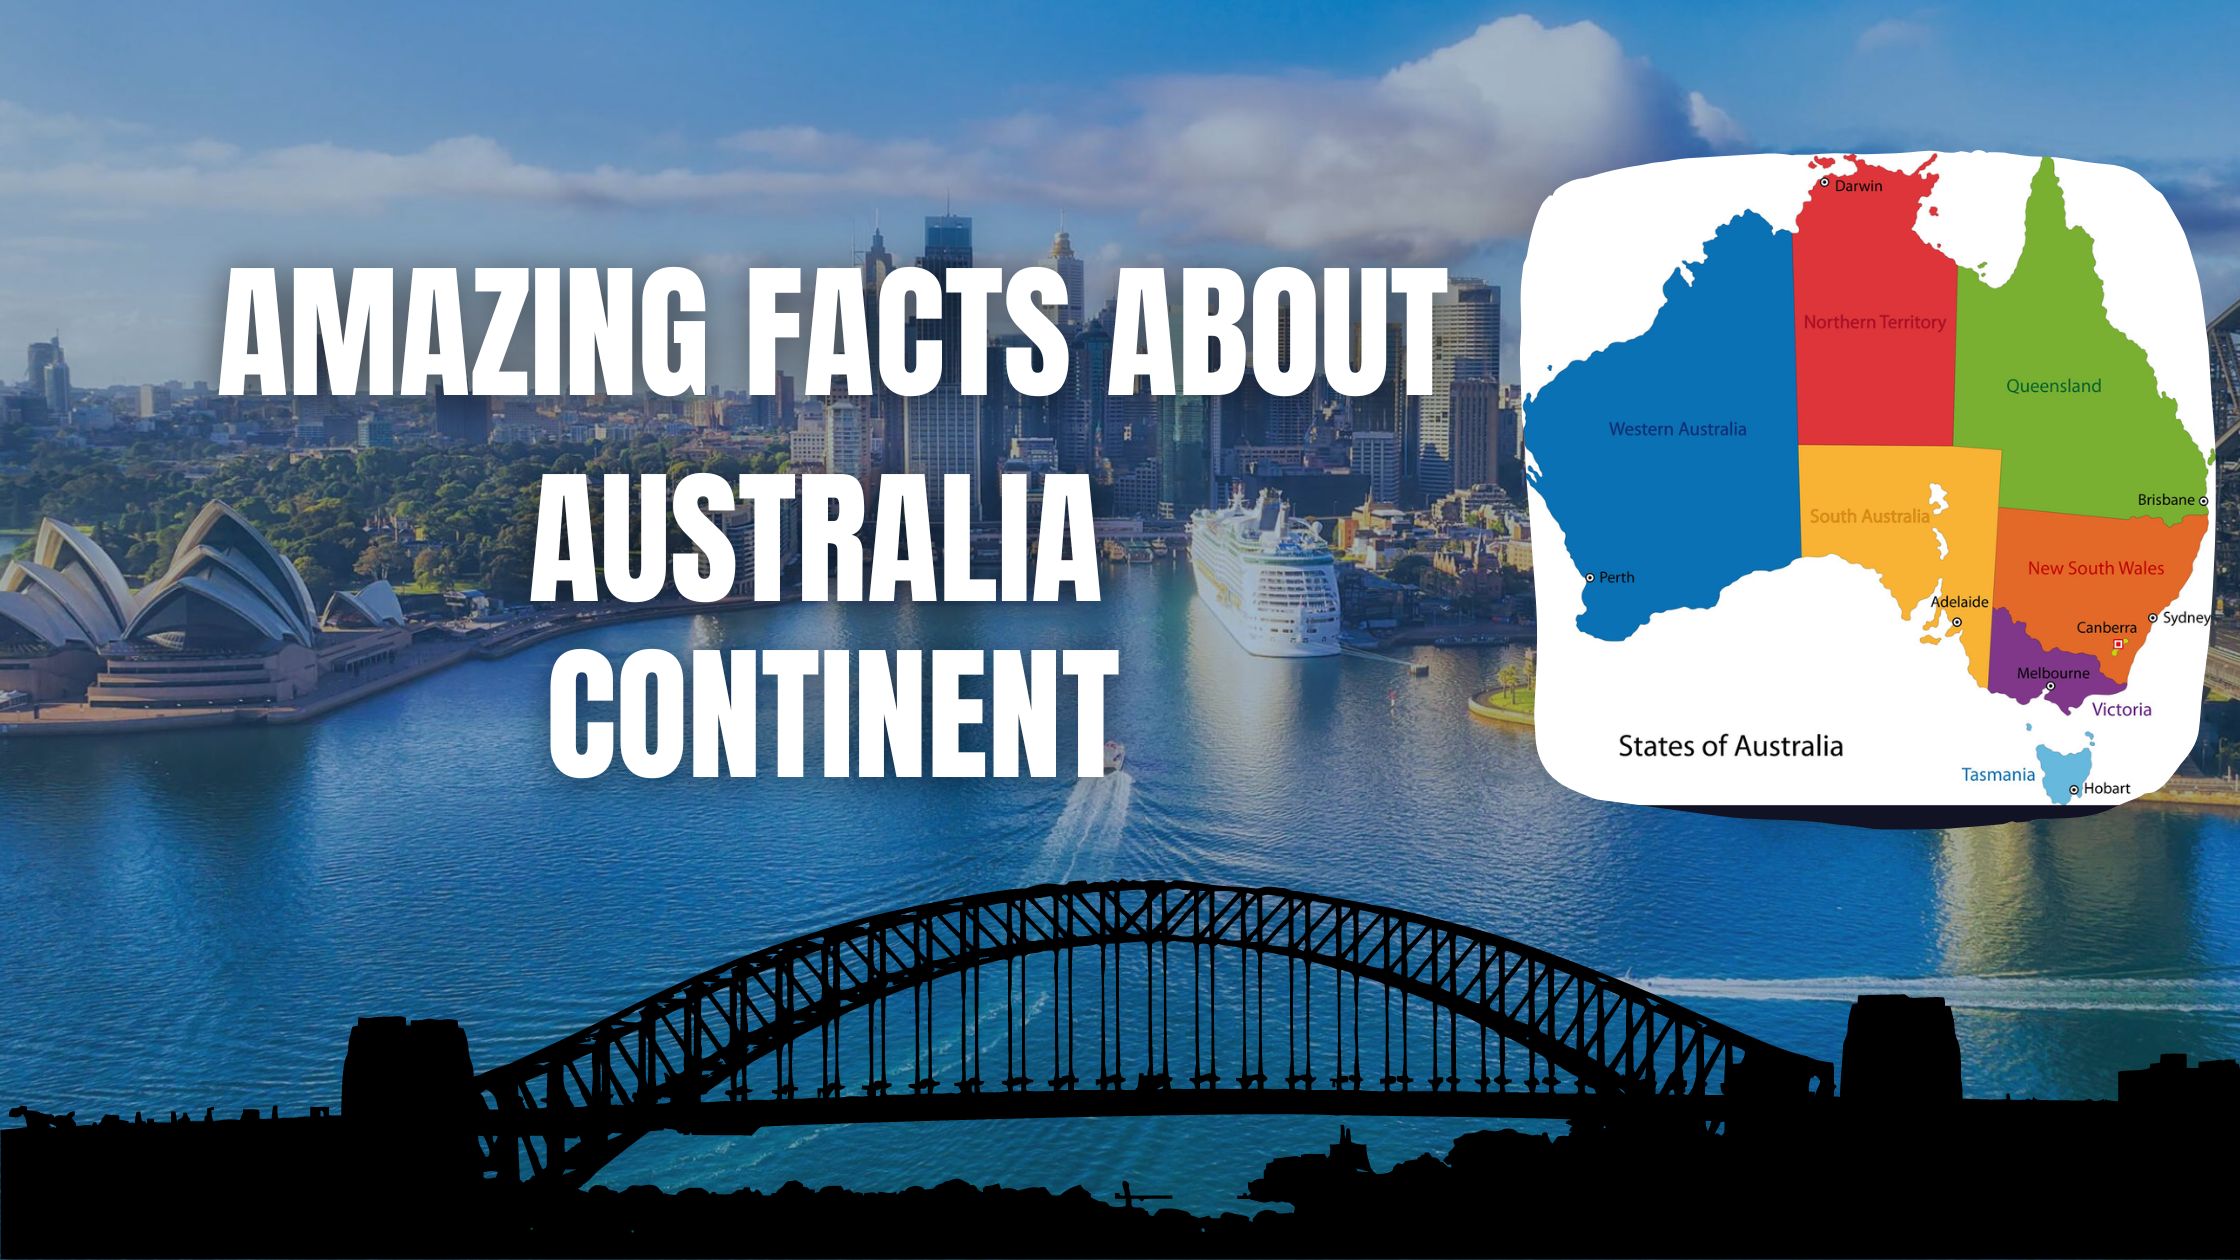 Amazing facts about Australia Continent